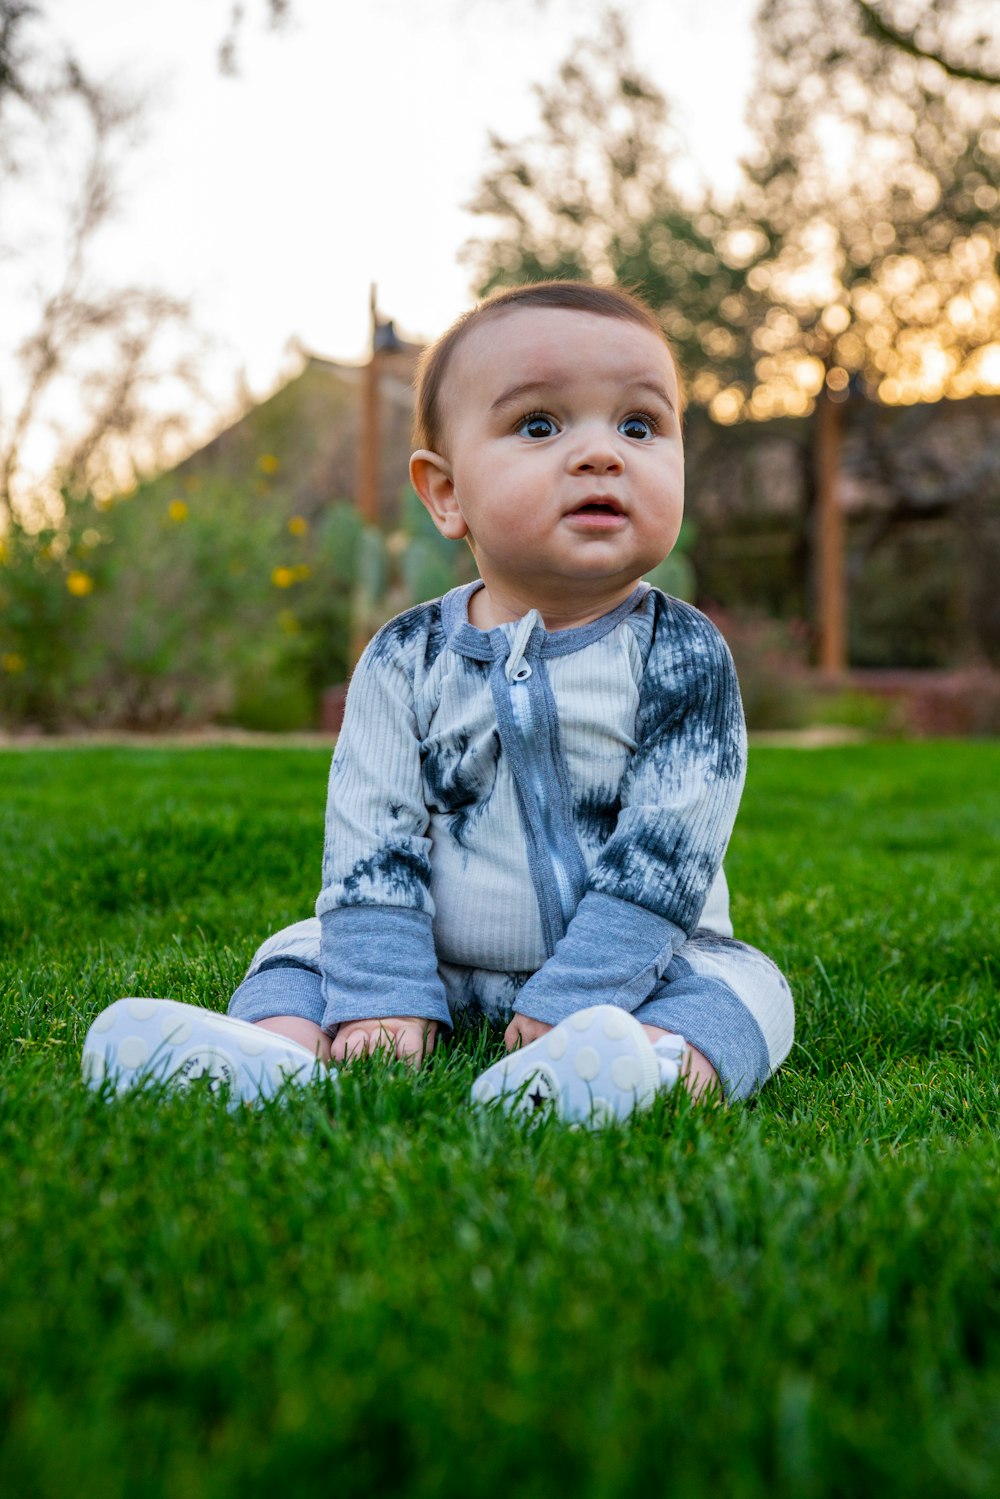 baby in gray sweater sitting on green grass field during daytime